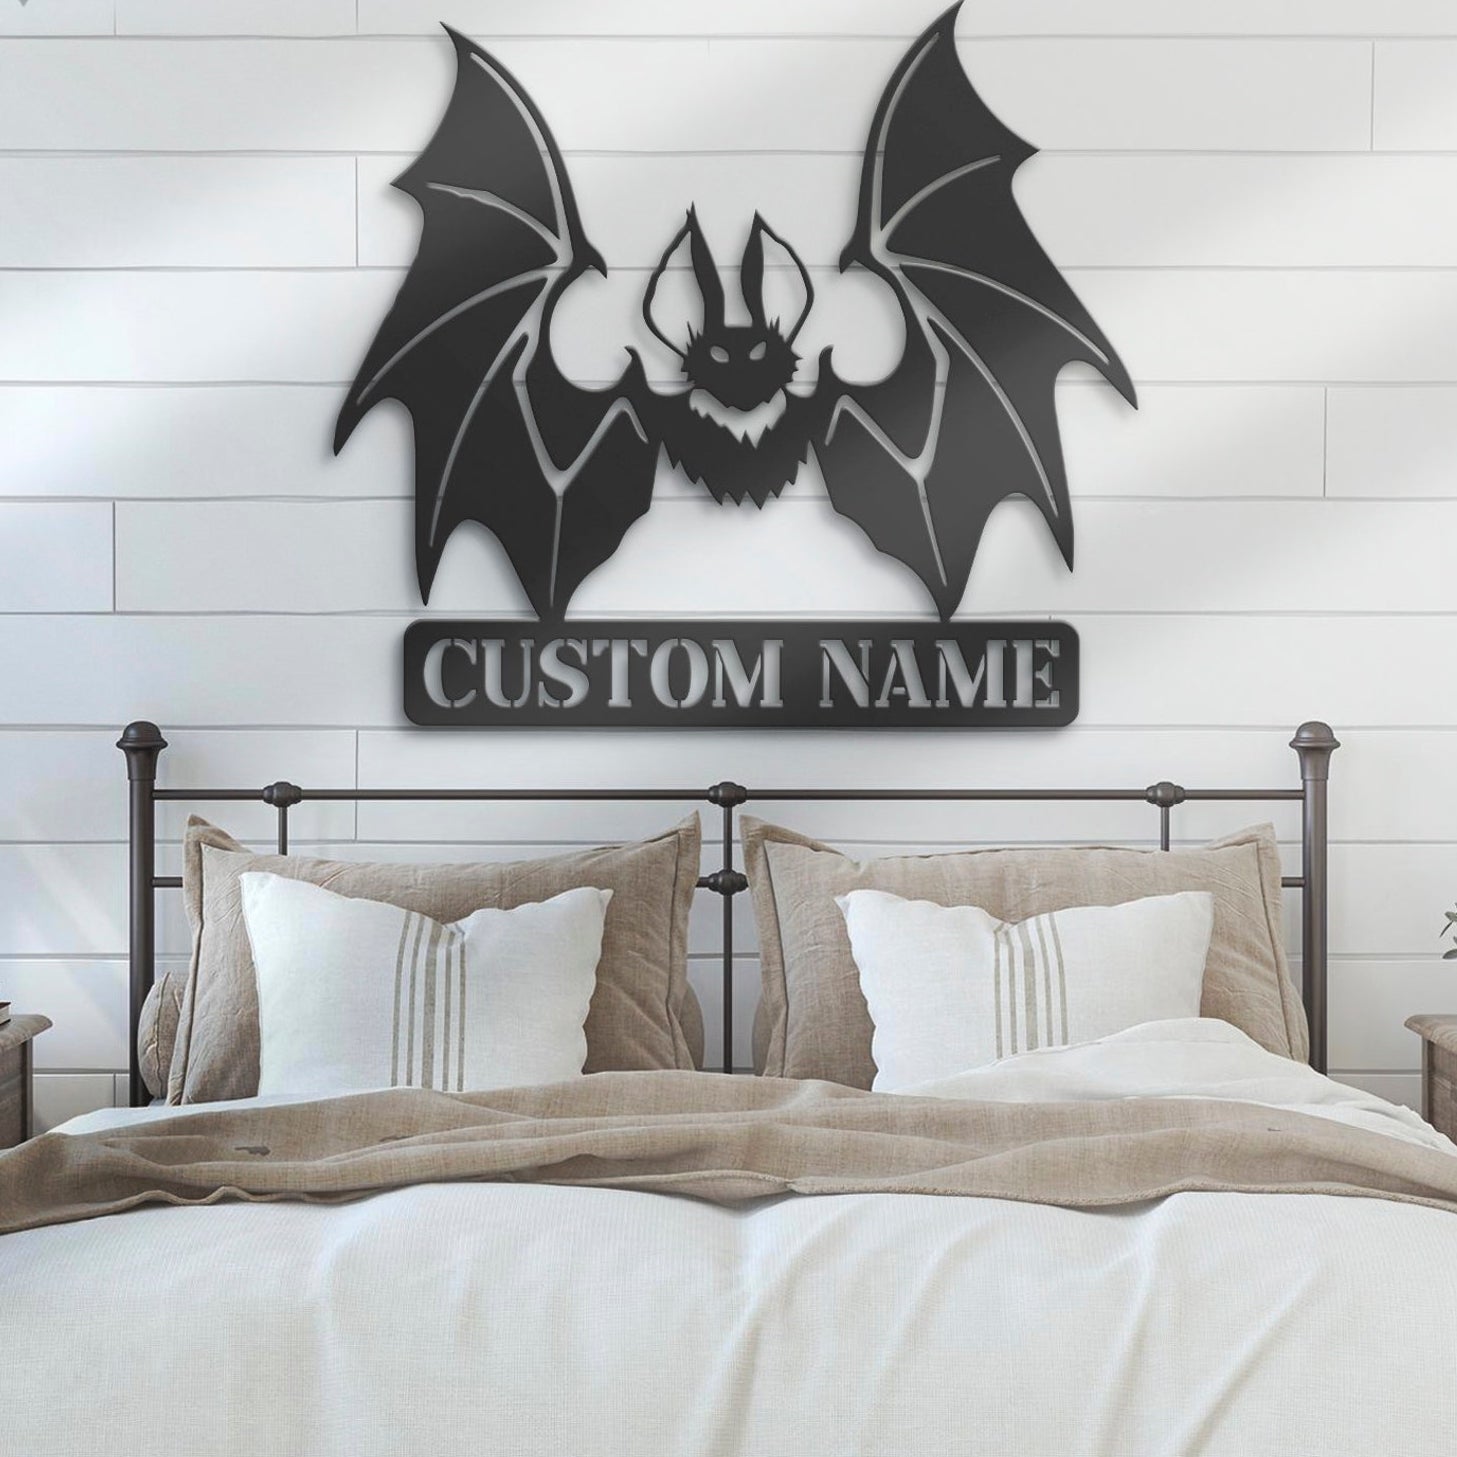 NEONIP-Personalized 100% Handmade Halloween Metal Sign LED Neon Sign with Bat